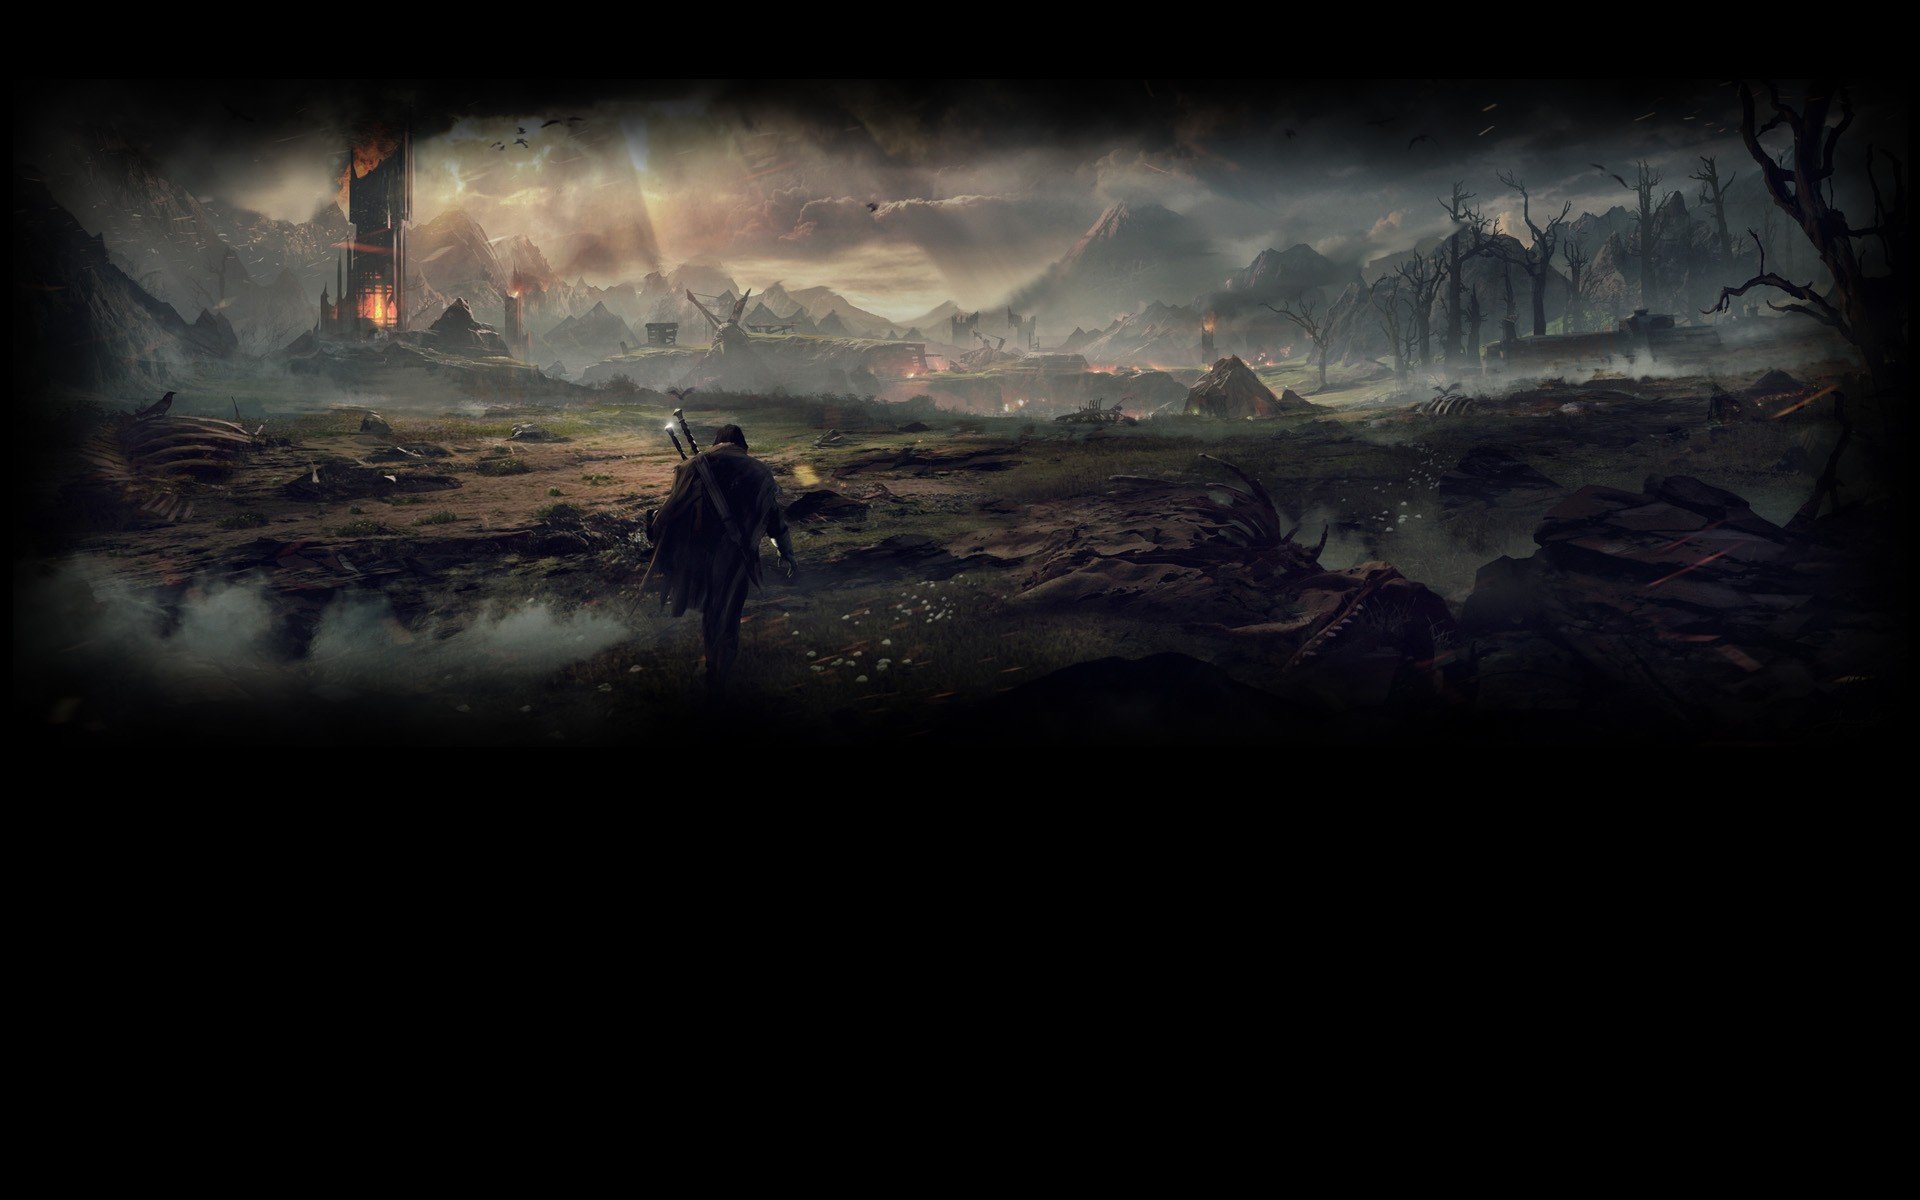 Middle earth: Shadow of Mordor Wallpaper